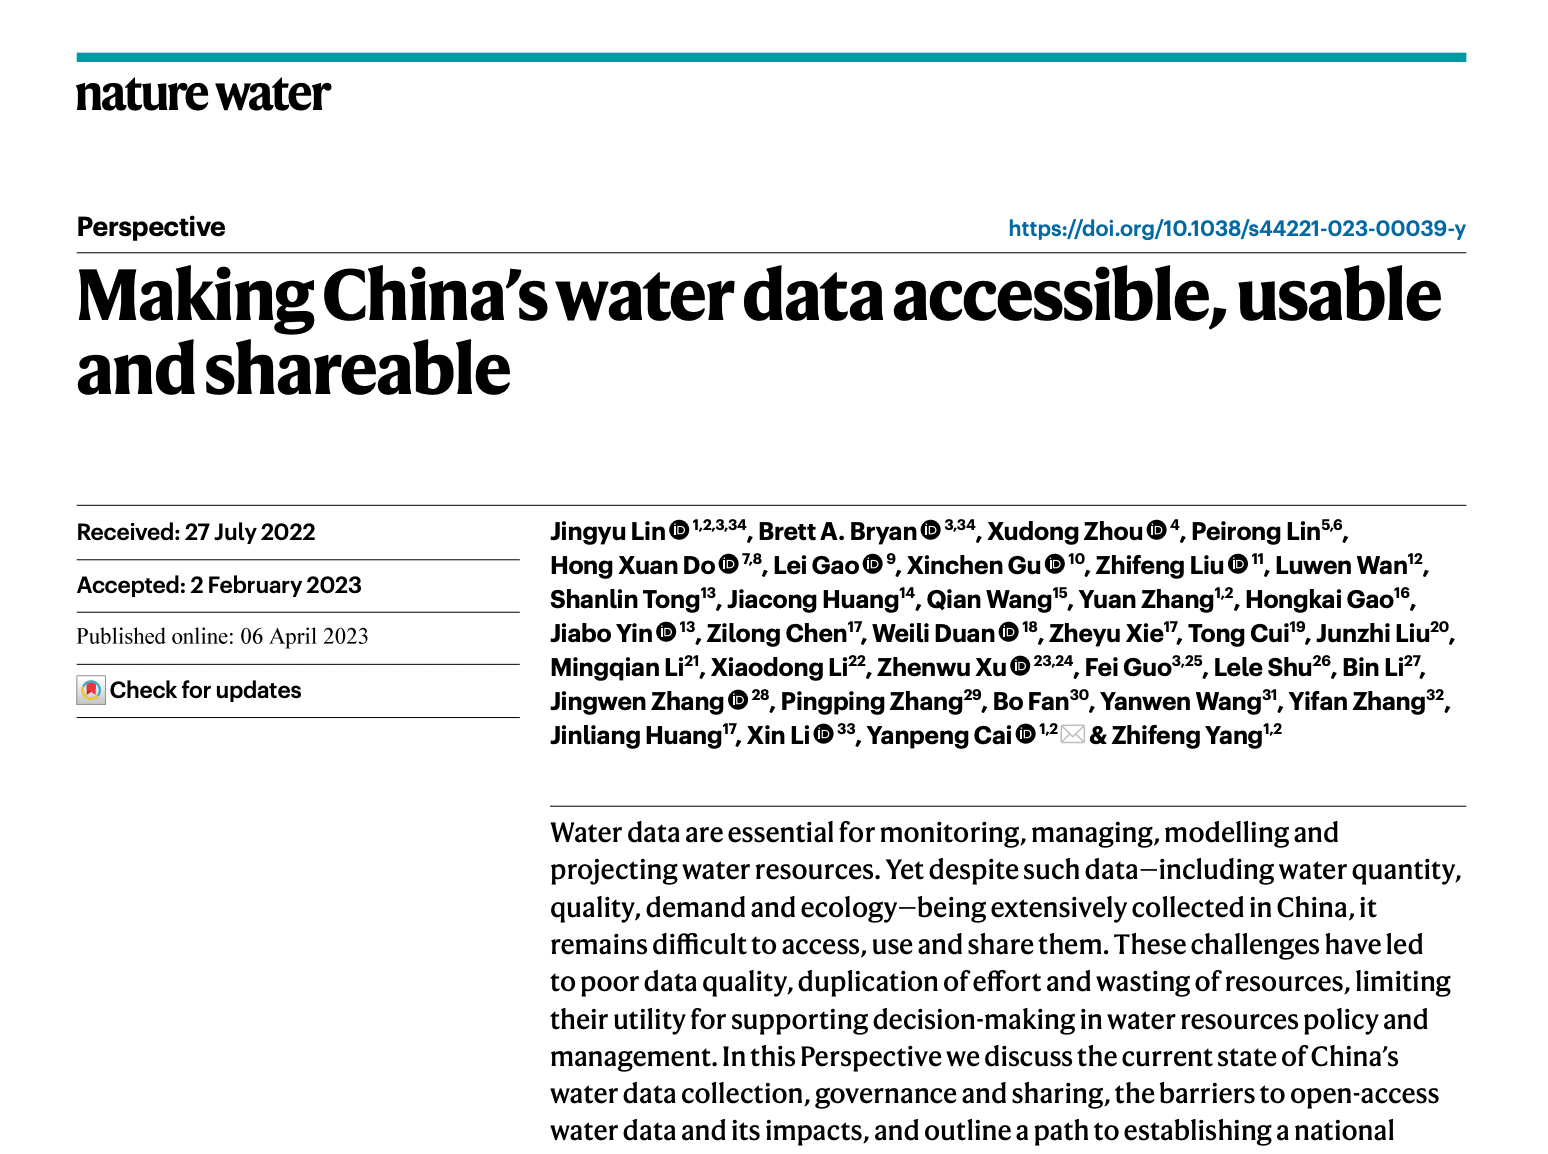 Making China’s water data accessible, usable and shareable